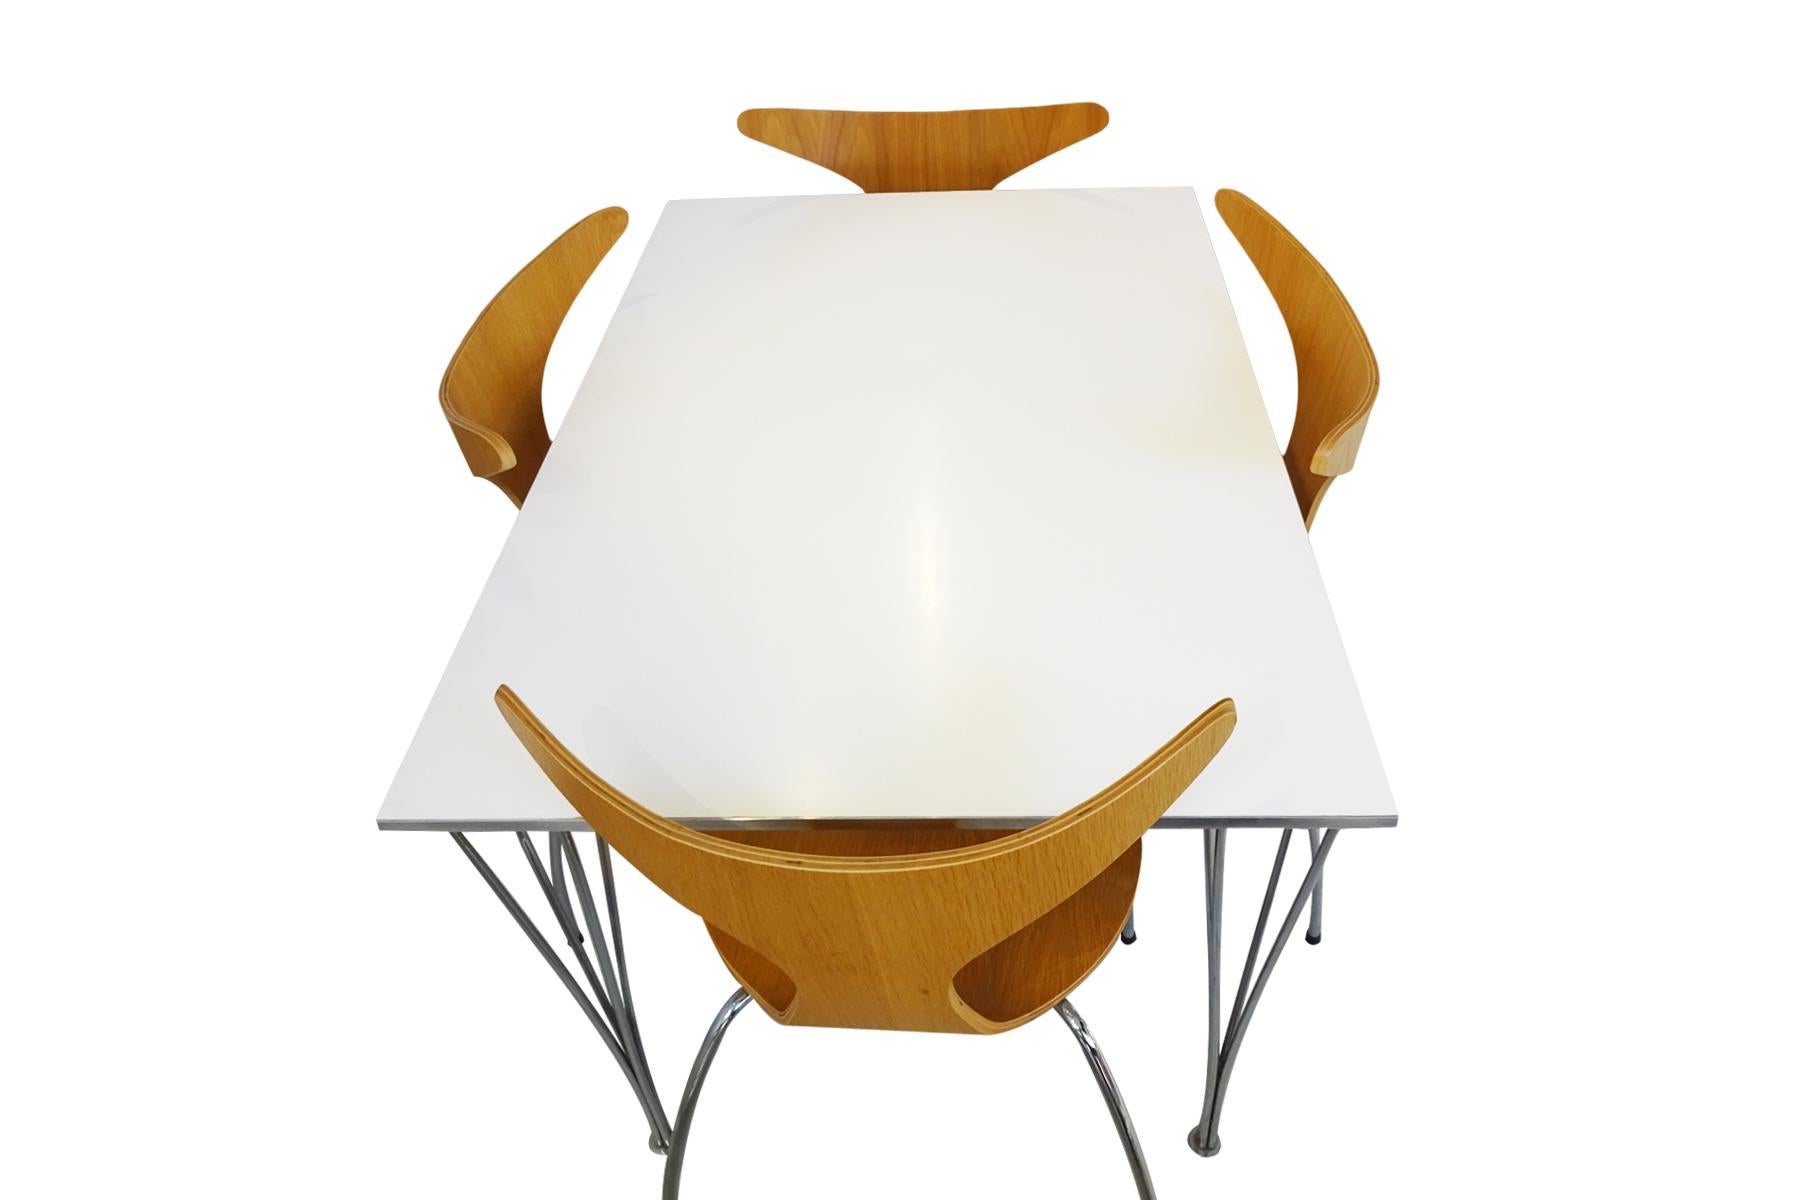 A Mid century 1960s designed white and silver rectangular dining table designed by Piet Hein, Arne Jacobsen and Bruno Mathsson manufactured by Fritz Hansen in 1989 and a set of Danish designed Danform ‘Dolphin’ stacking chairs in oak veneer and